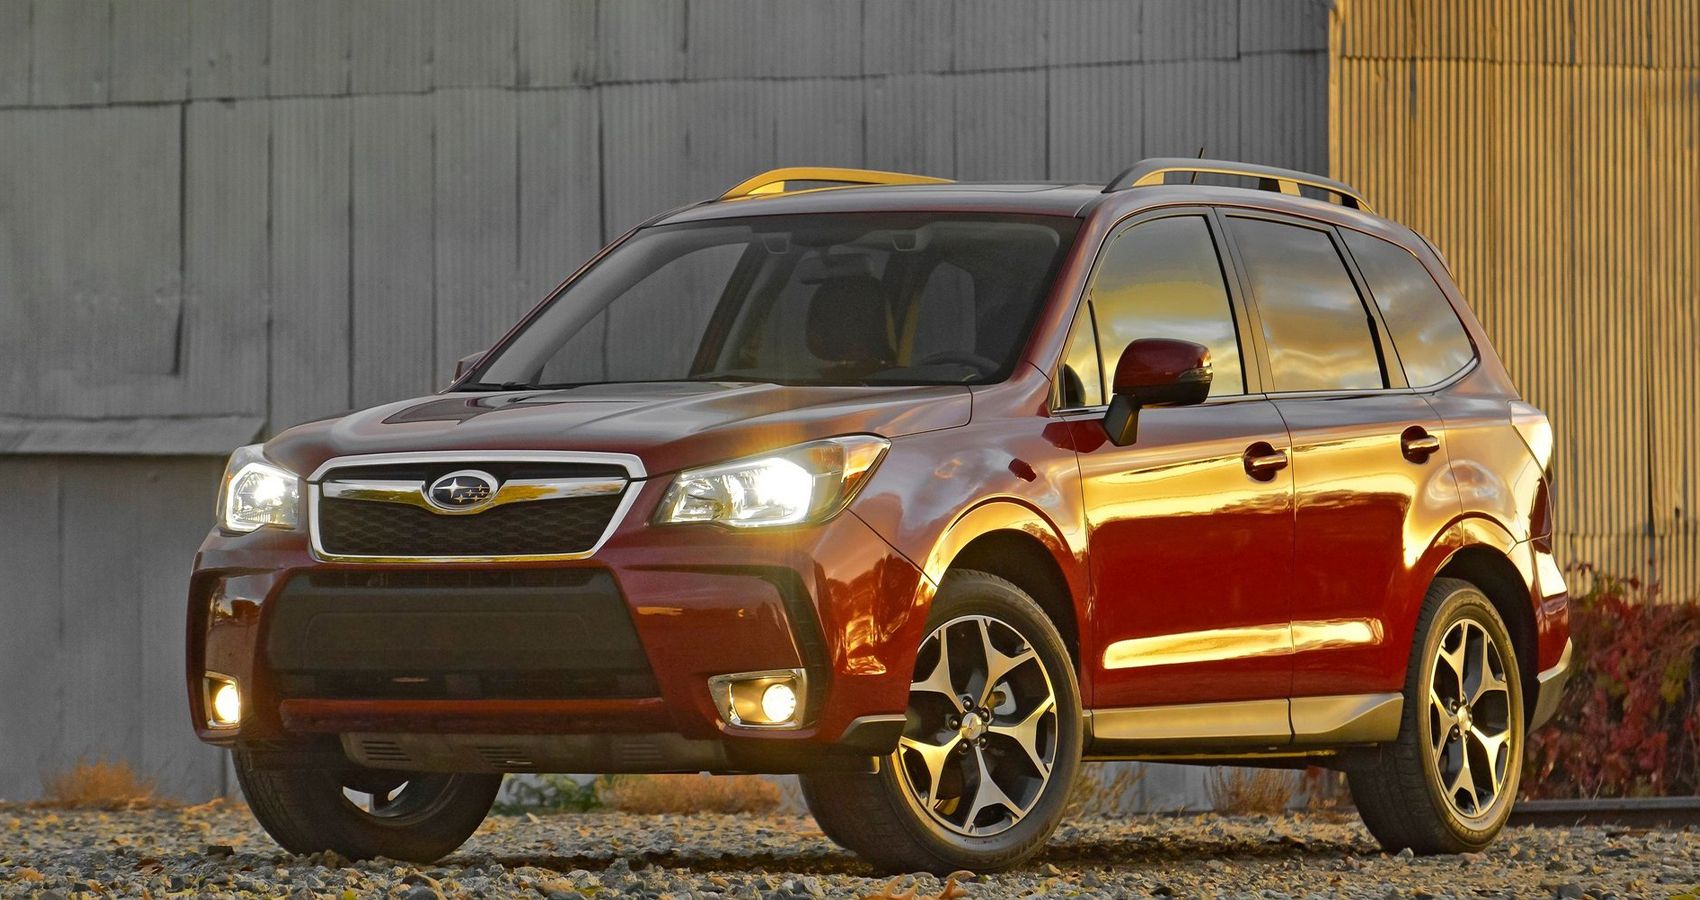 2014 Subaru Forester Front View